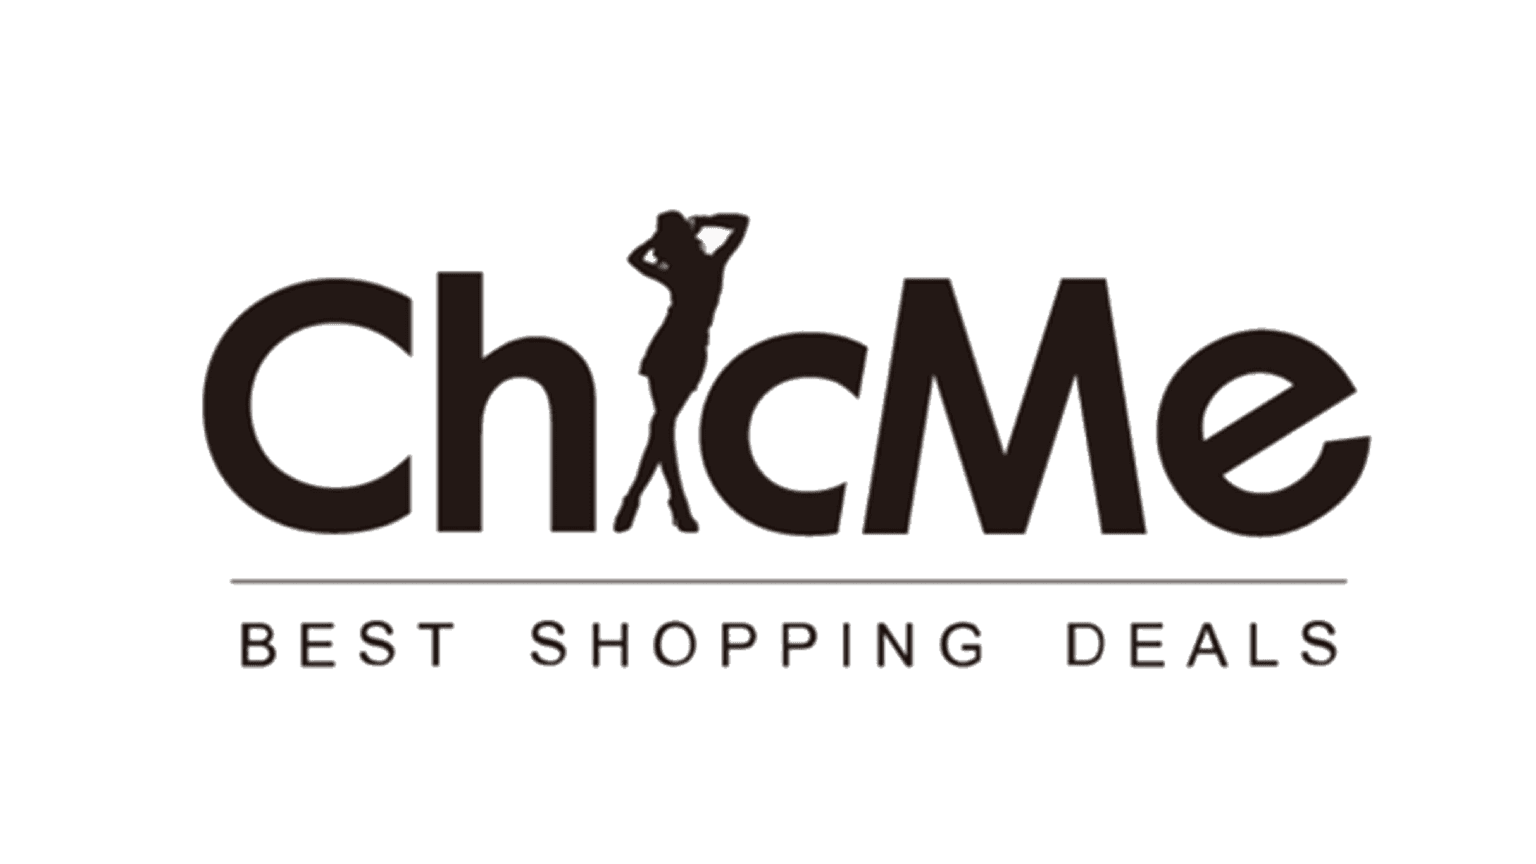 Chic Me Coupon codes and Discounts - Enjoy 12 unbeatable deals